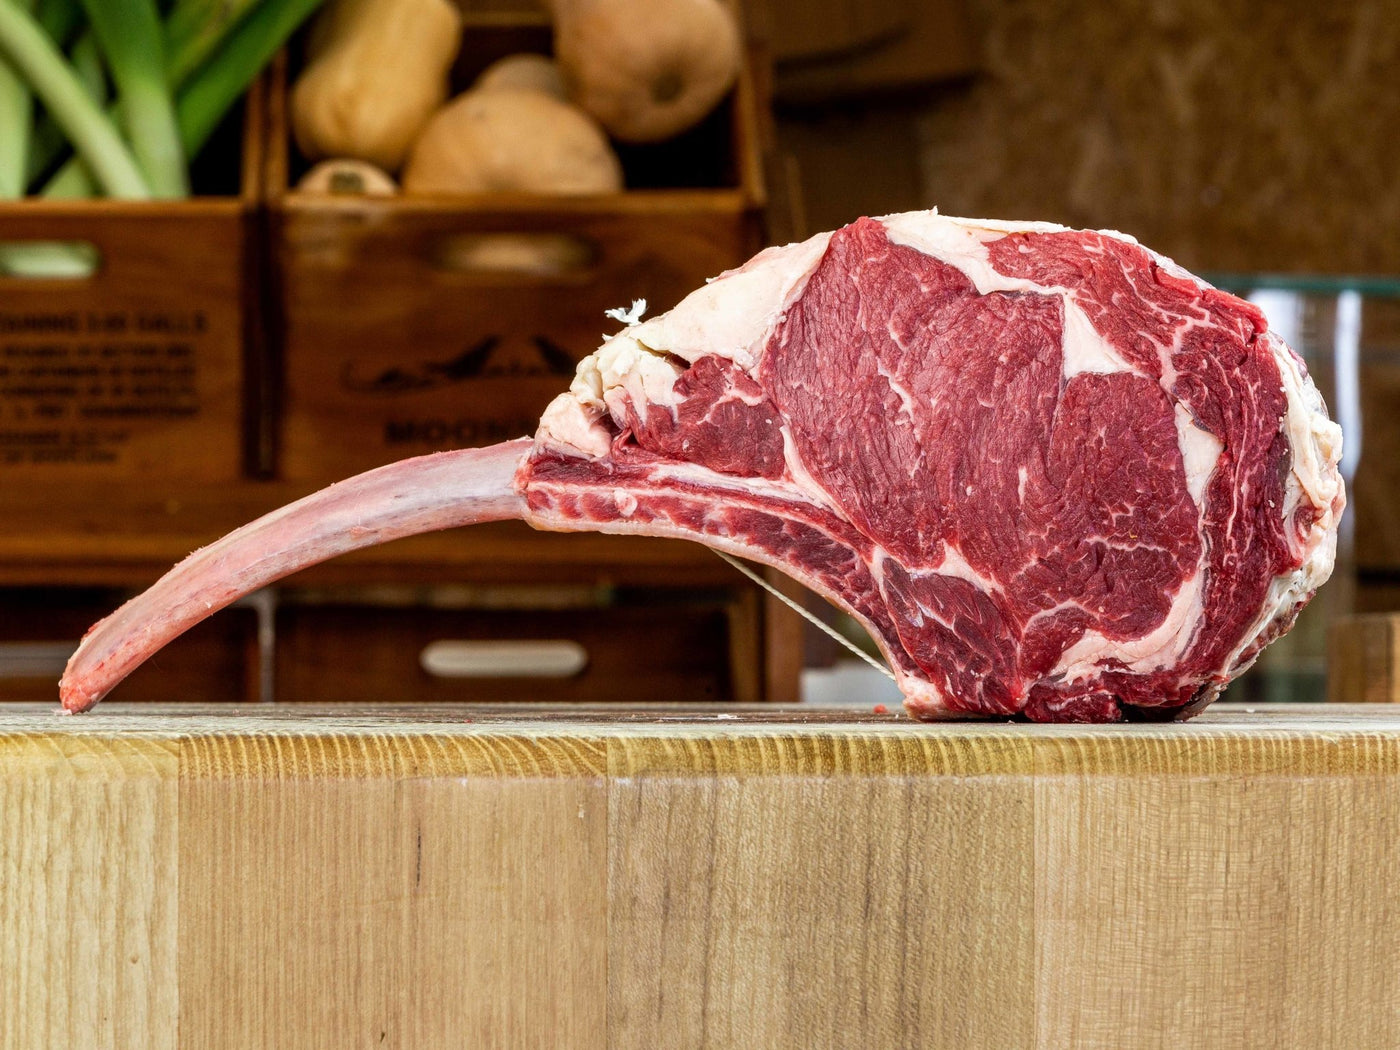 Grass Fed, Dry-Aged Tomahawk - Beef - Thomas Joseph Butchery - Ethical Dry-Aged Meat The Best Steak UK Thomas Joseph Butchery